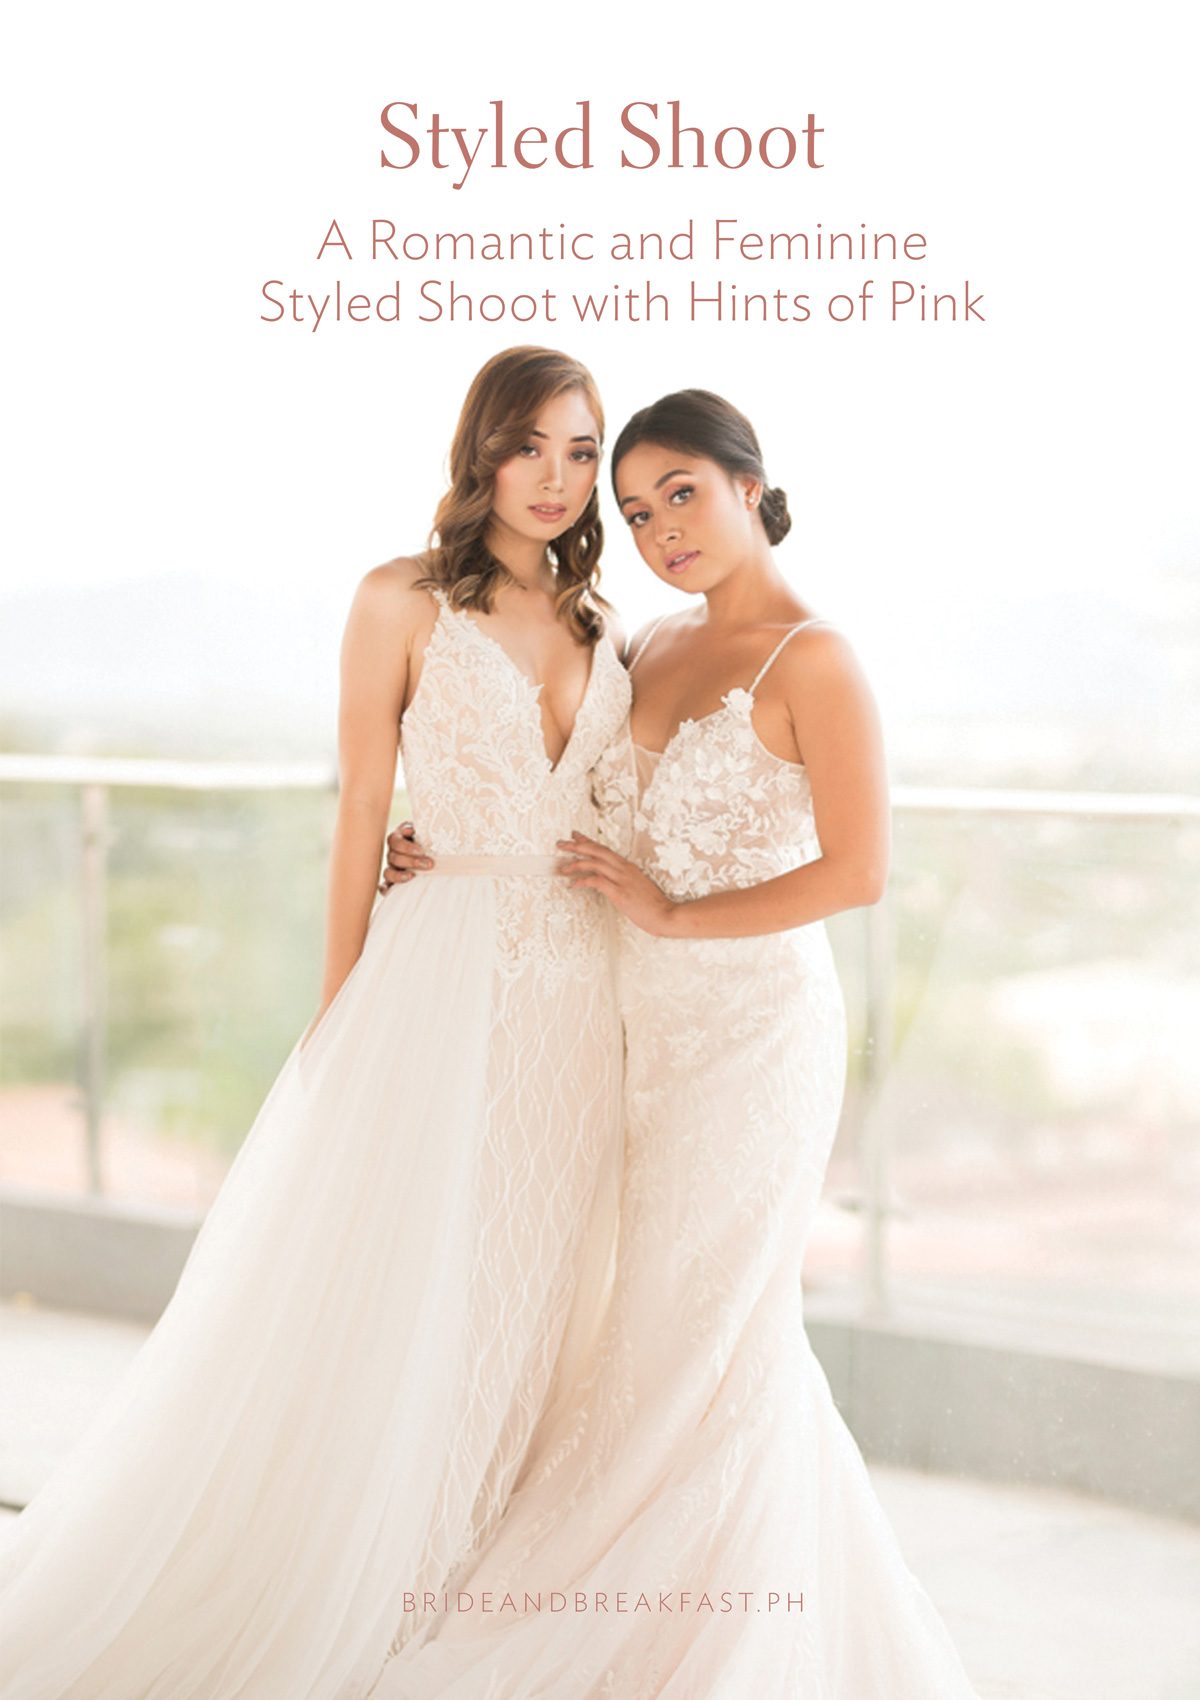 A Romantic and Feminine Styled Shoot with Hints of Pink